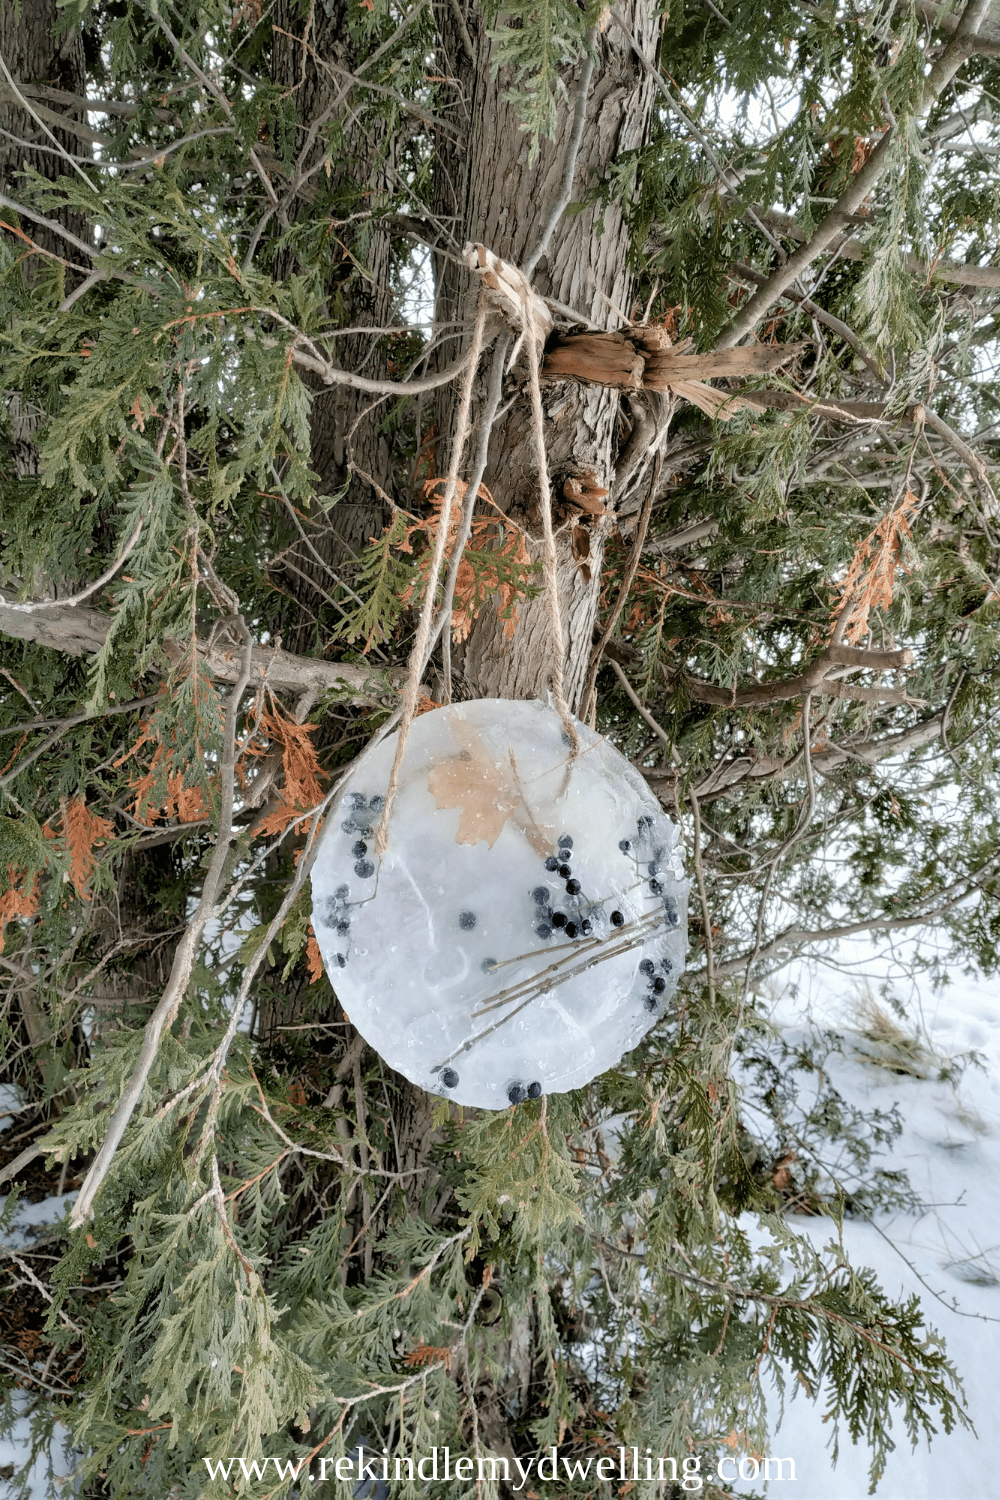 Ice sun catcher hanging on a tree branch.